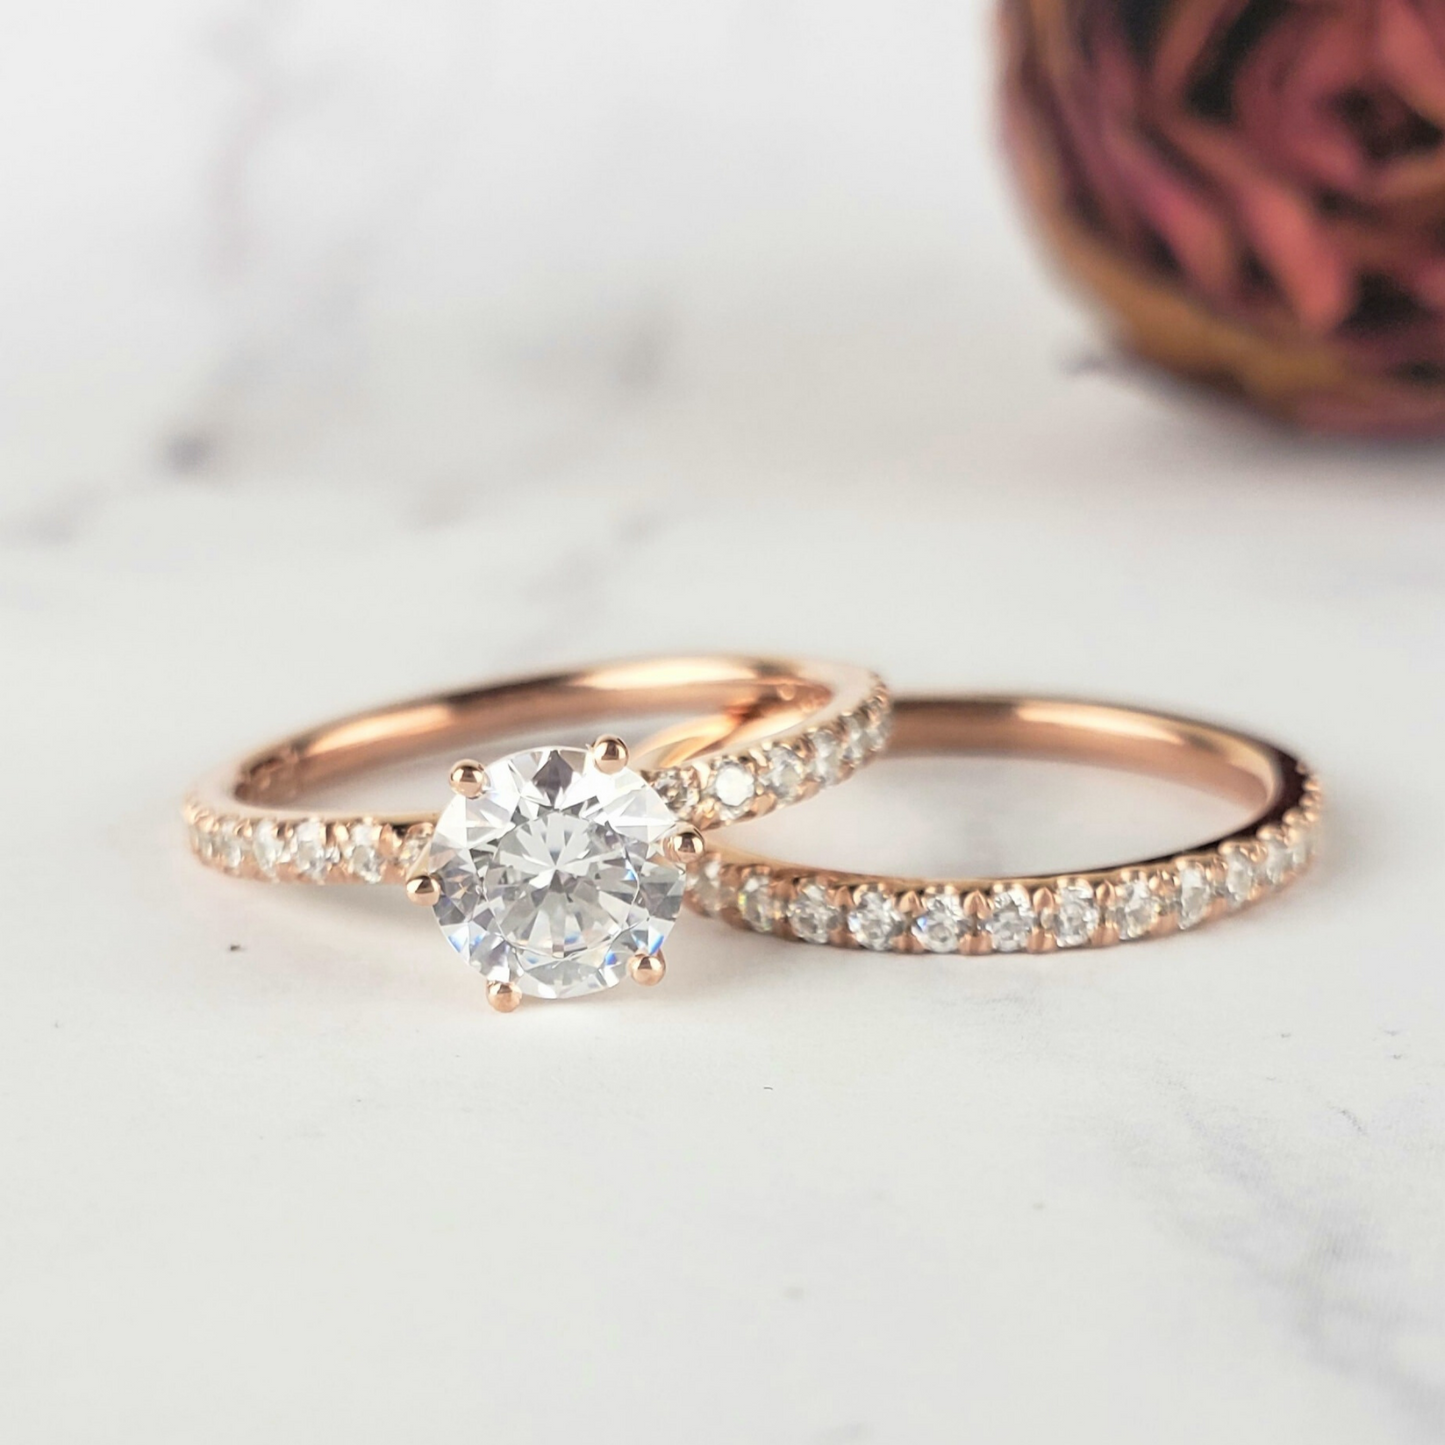 1ct solitaire engagement ring in rose gold